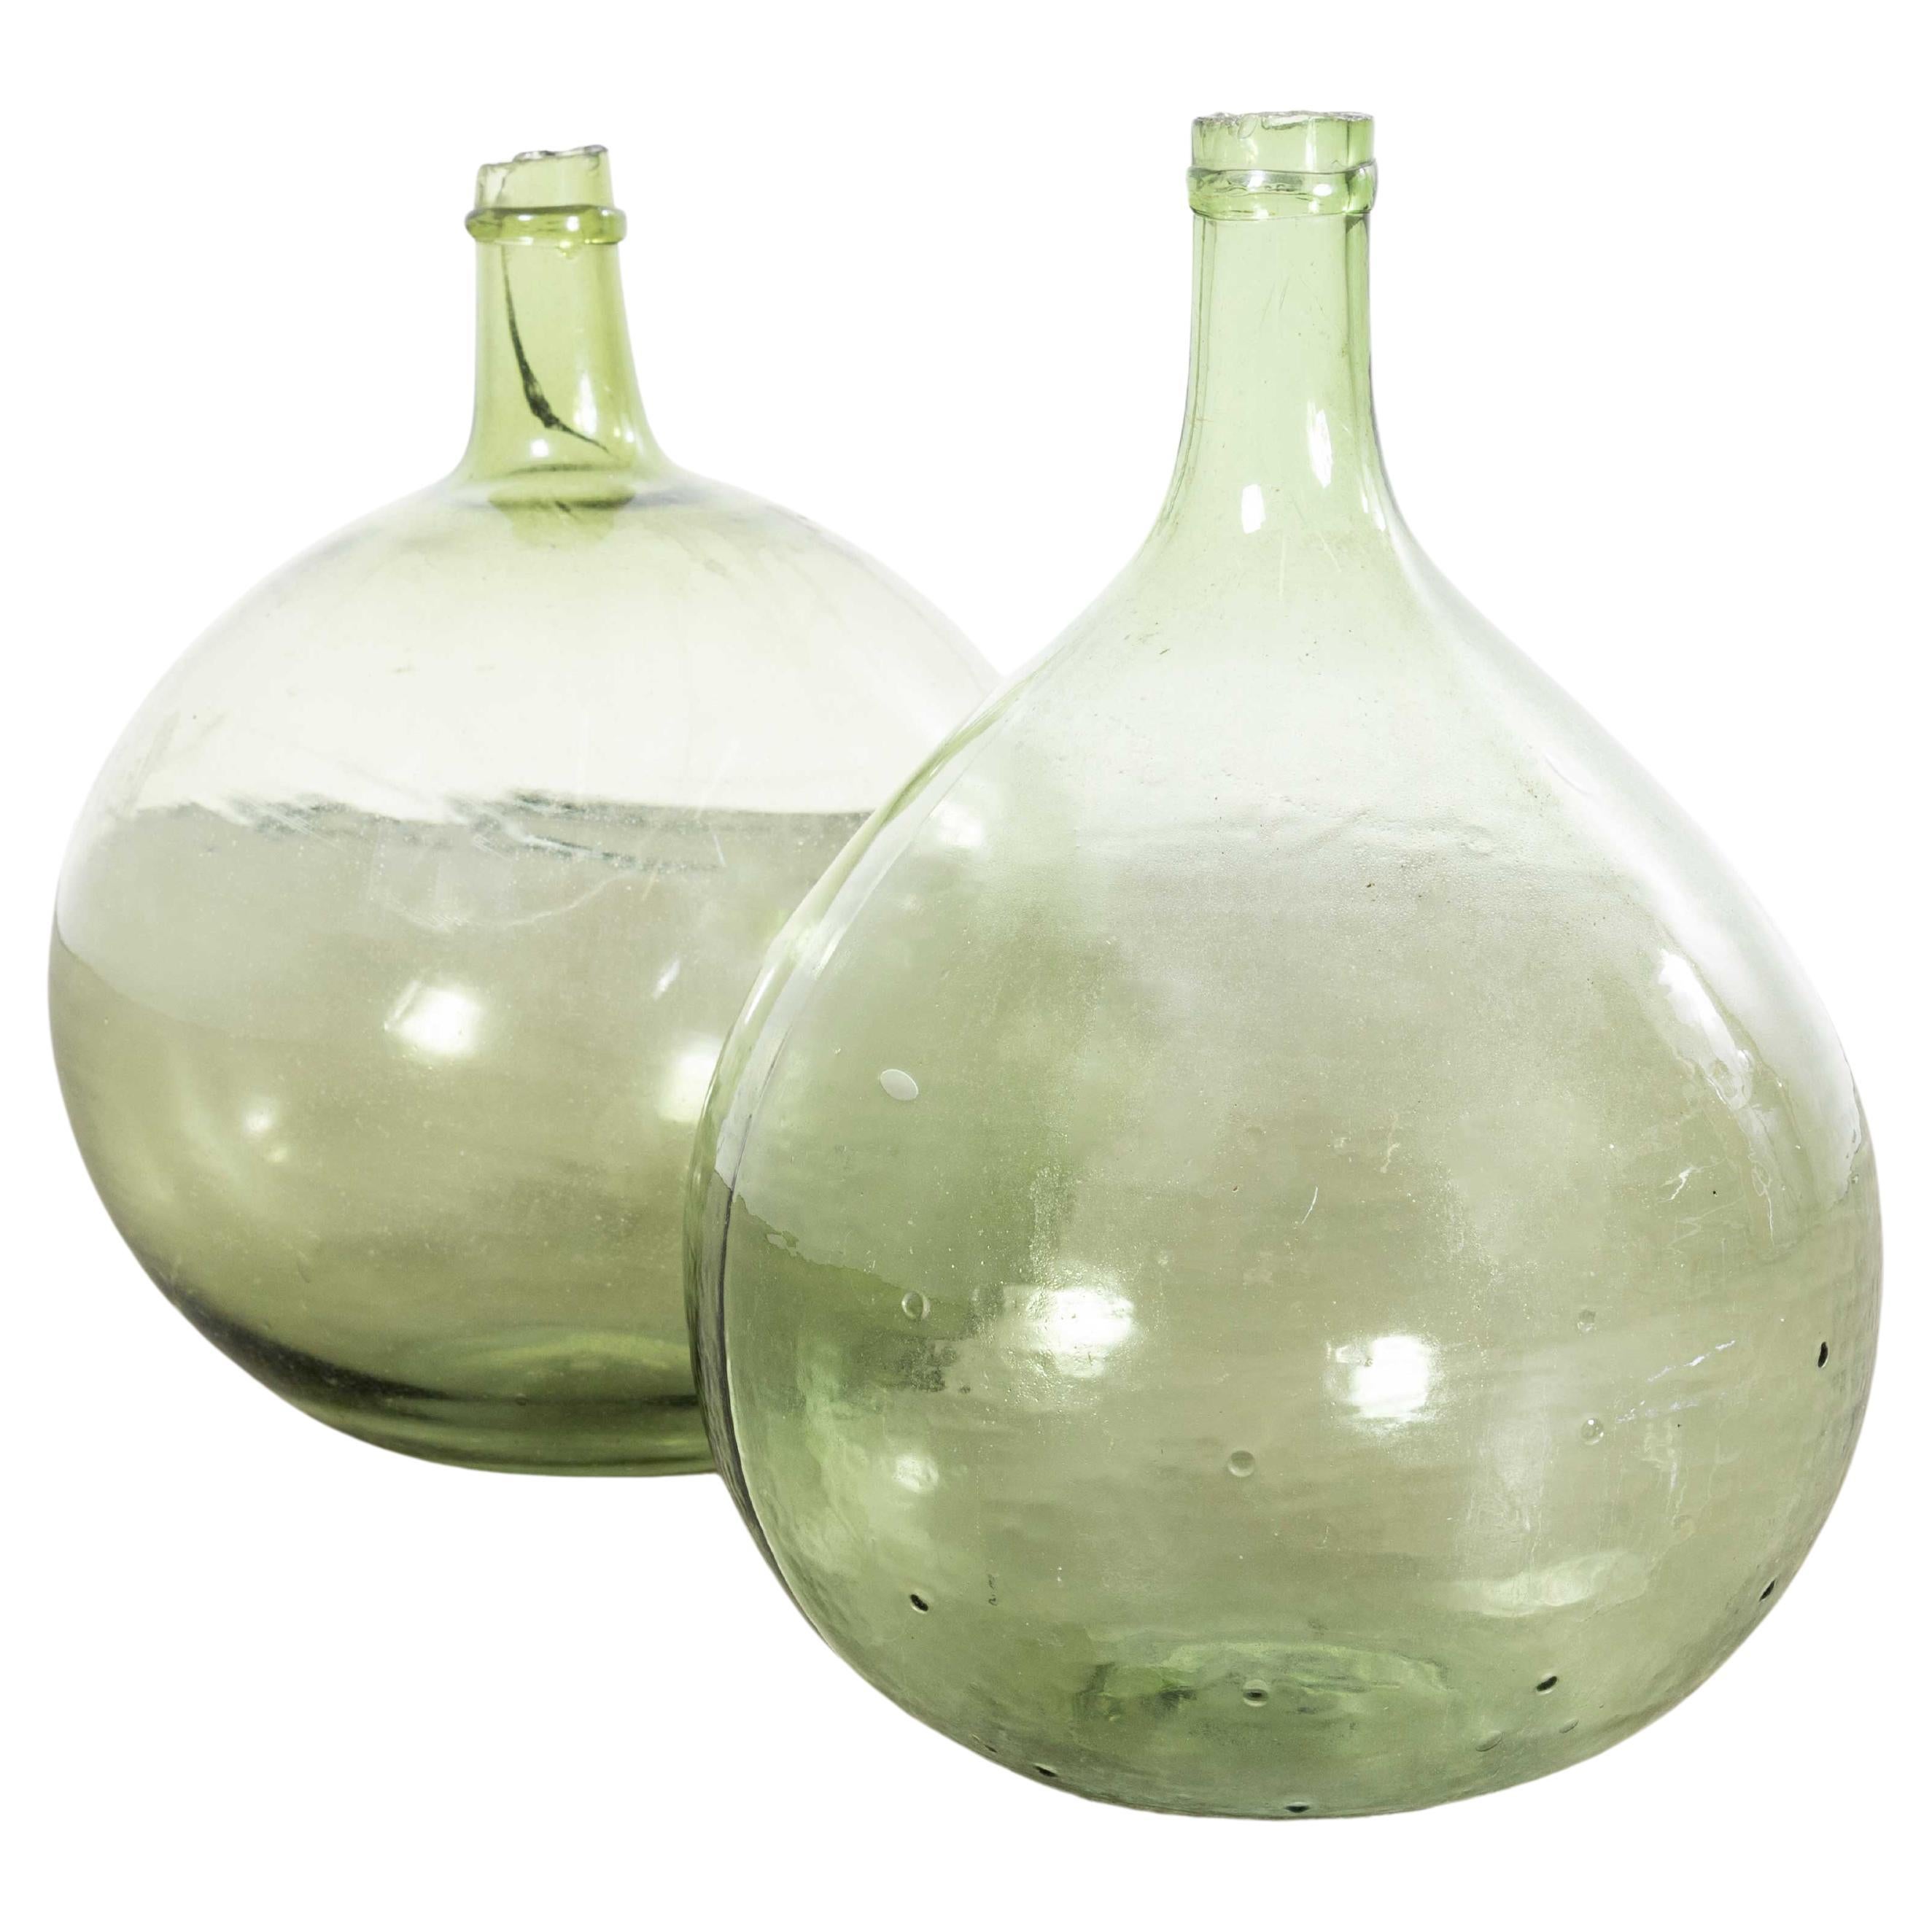 Vintage French Glass Demijohns - Pair (957.21)